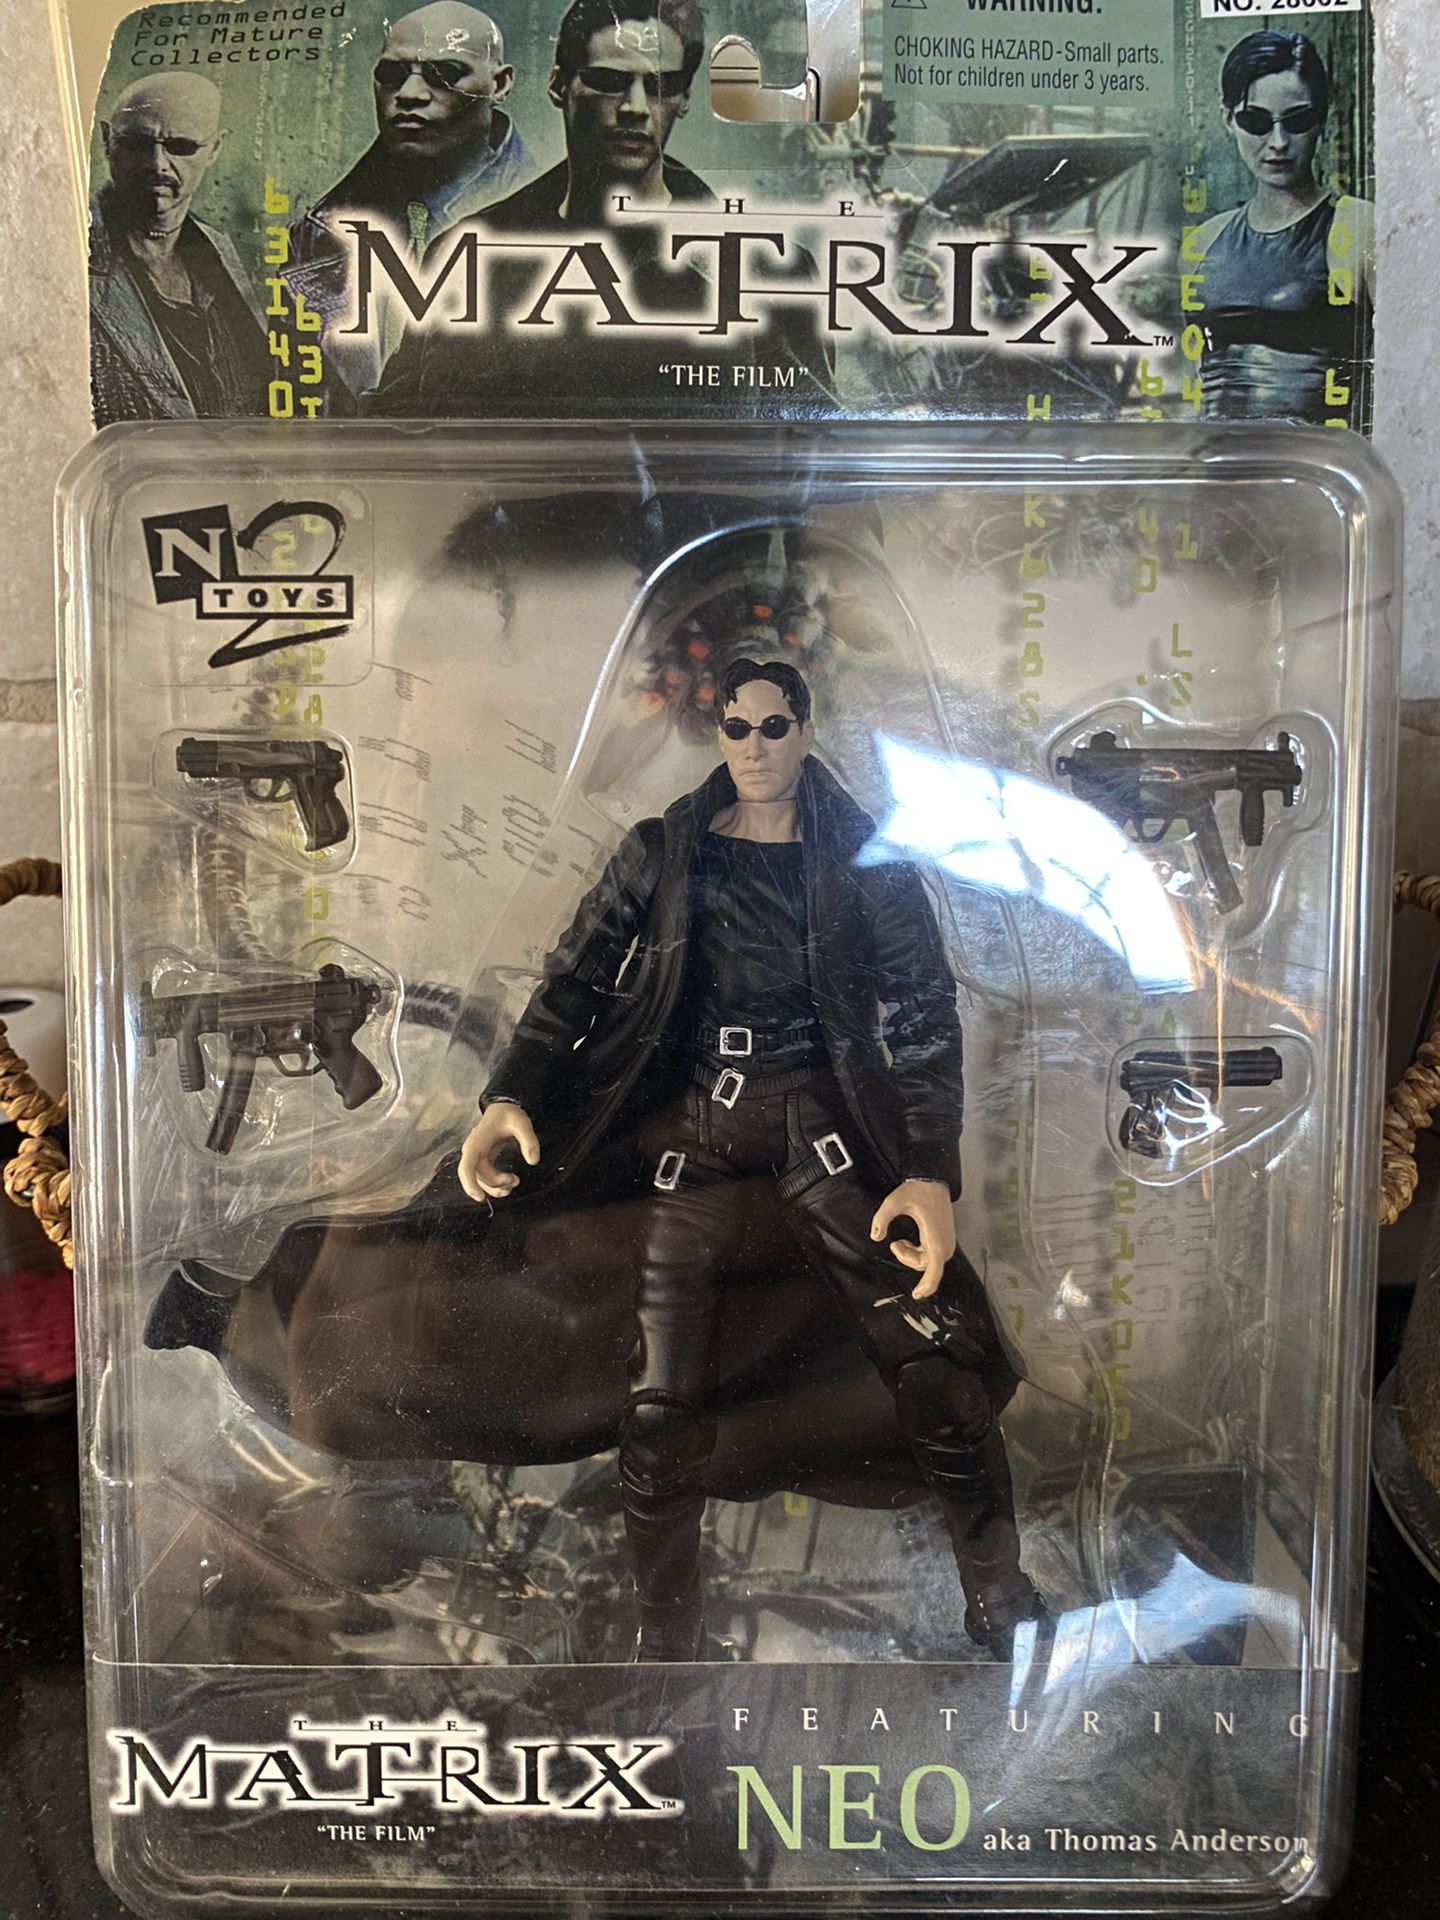 Neo from the matrix